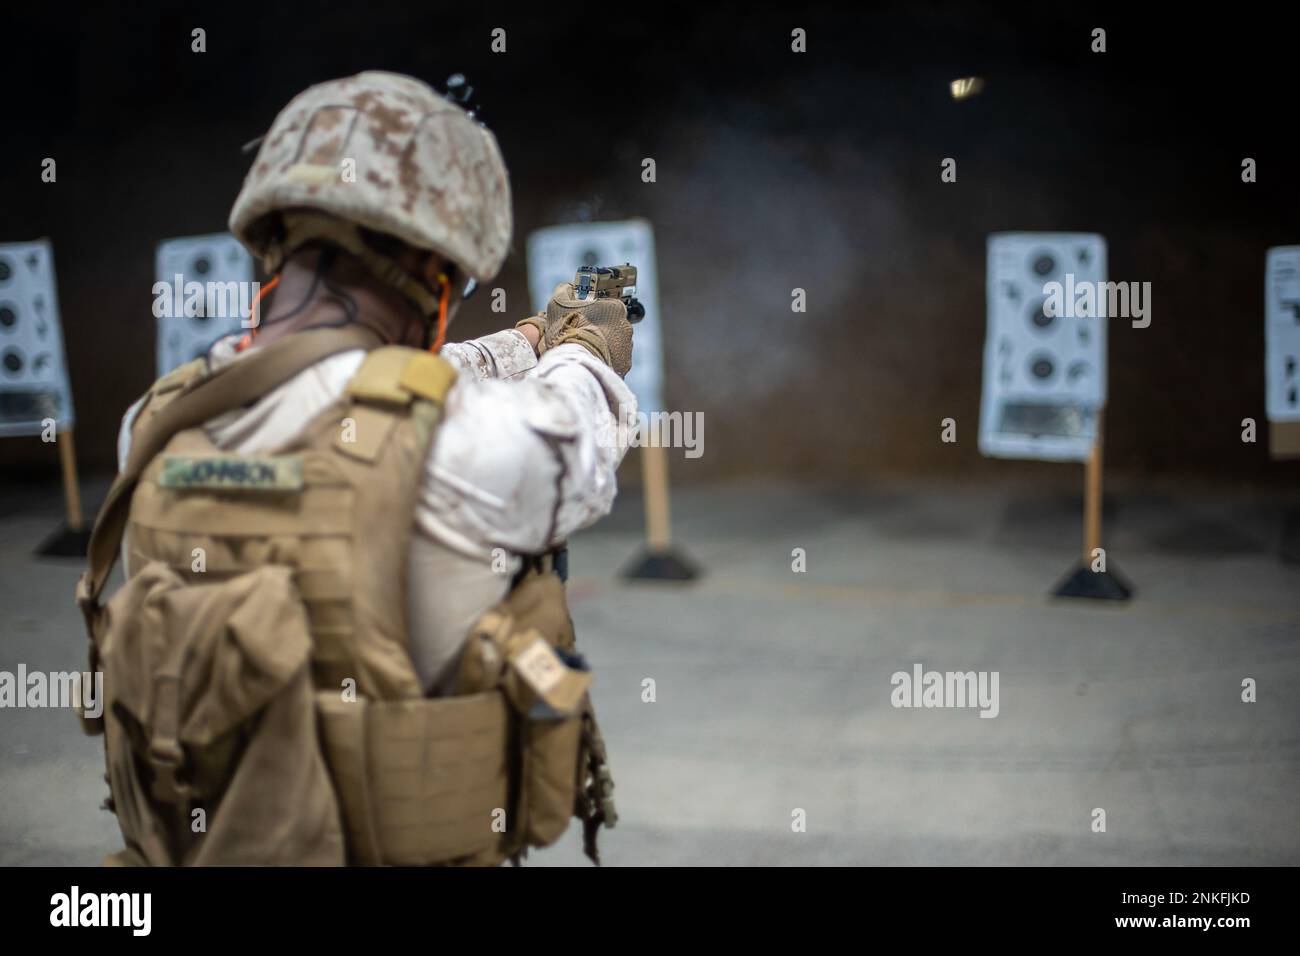 U.S. FIFTH FLEET AREA OF OPERATIONS (August 14, 2022) – A U.S. Marine assigned to Fleet Anti-Terrorism Security Team Central Command (FASTCENT) fires an M18 pistol during a live-fire drill at a training facility in the U.S. 5th Fleet area of operations, Aug. 14. FASTCENT provides expeditionary antiterrorism and security forces to embassies, consulates and other vital national assets throughout the region. Stock Photo